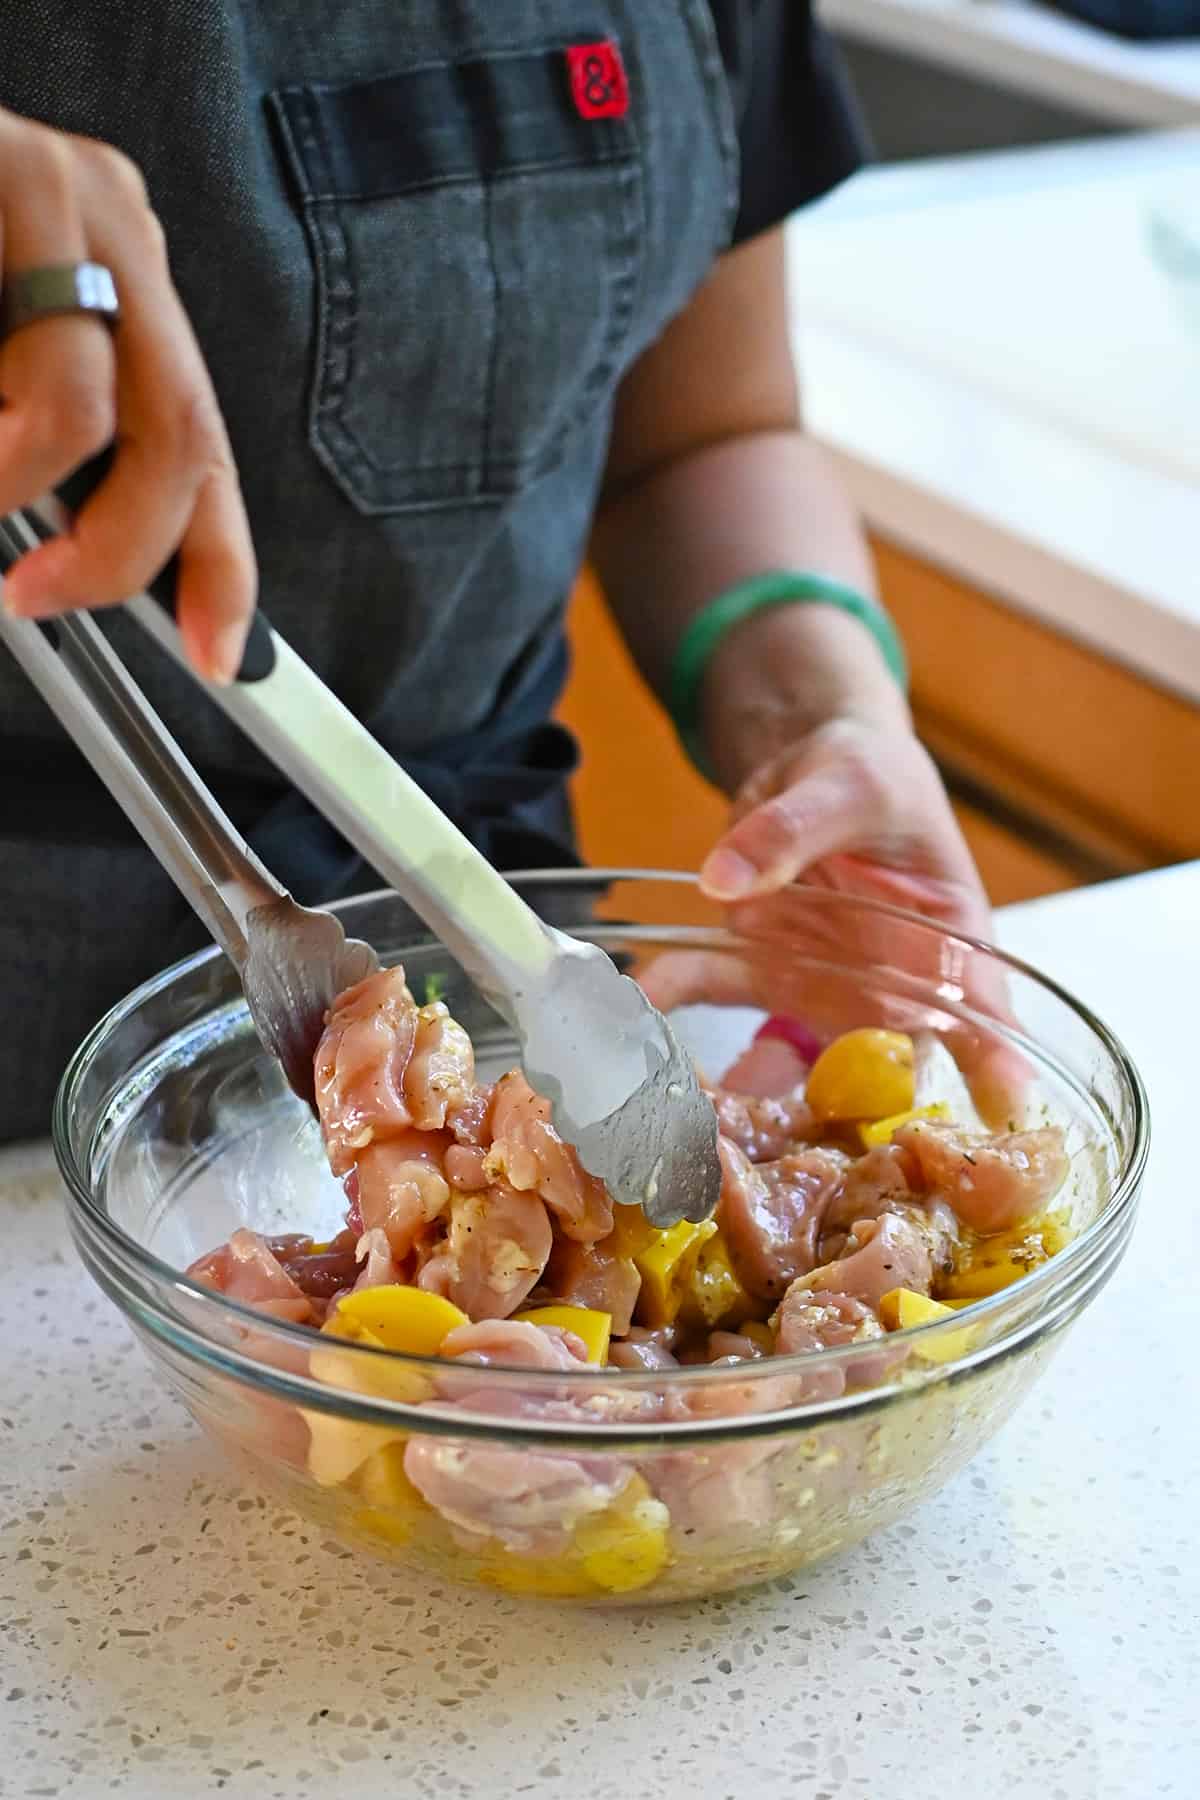 Tossing raw chicken thigh cubes and cut up yellow potatoes in a bowl with a Greek marinade.